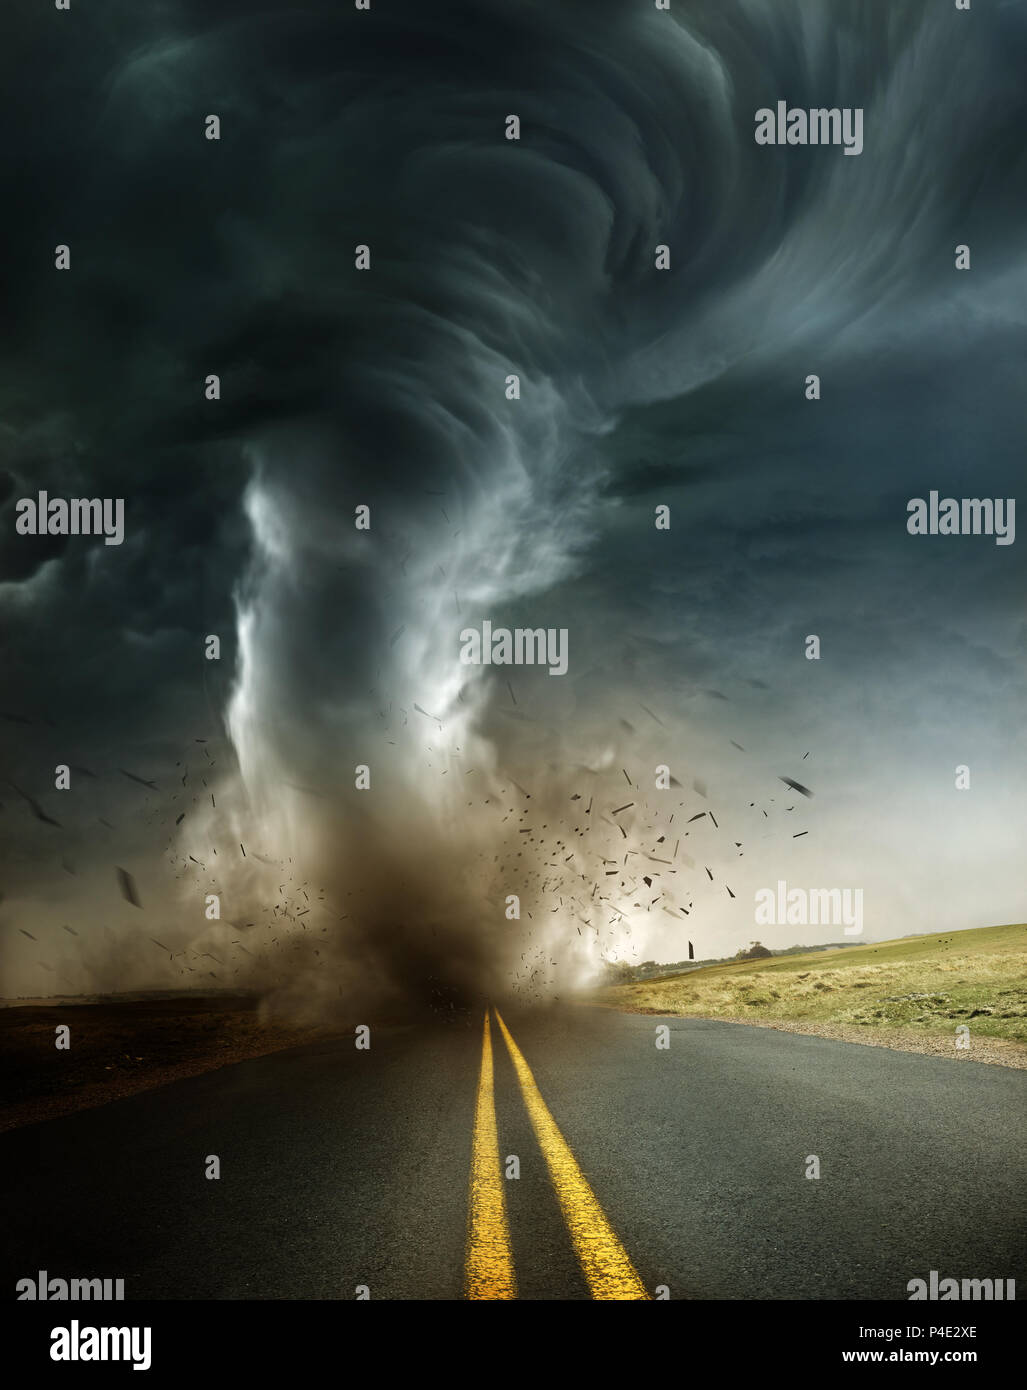 A powerful supercell storm producing a destructive tornado touching down on an isolated country road. Mixed media illustration. Stock Photo